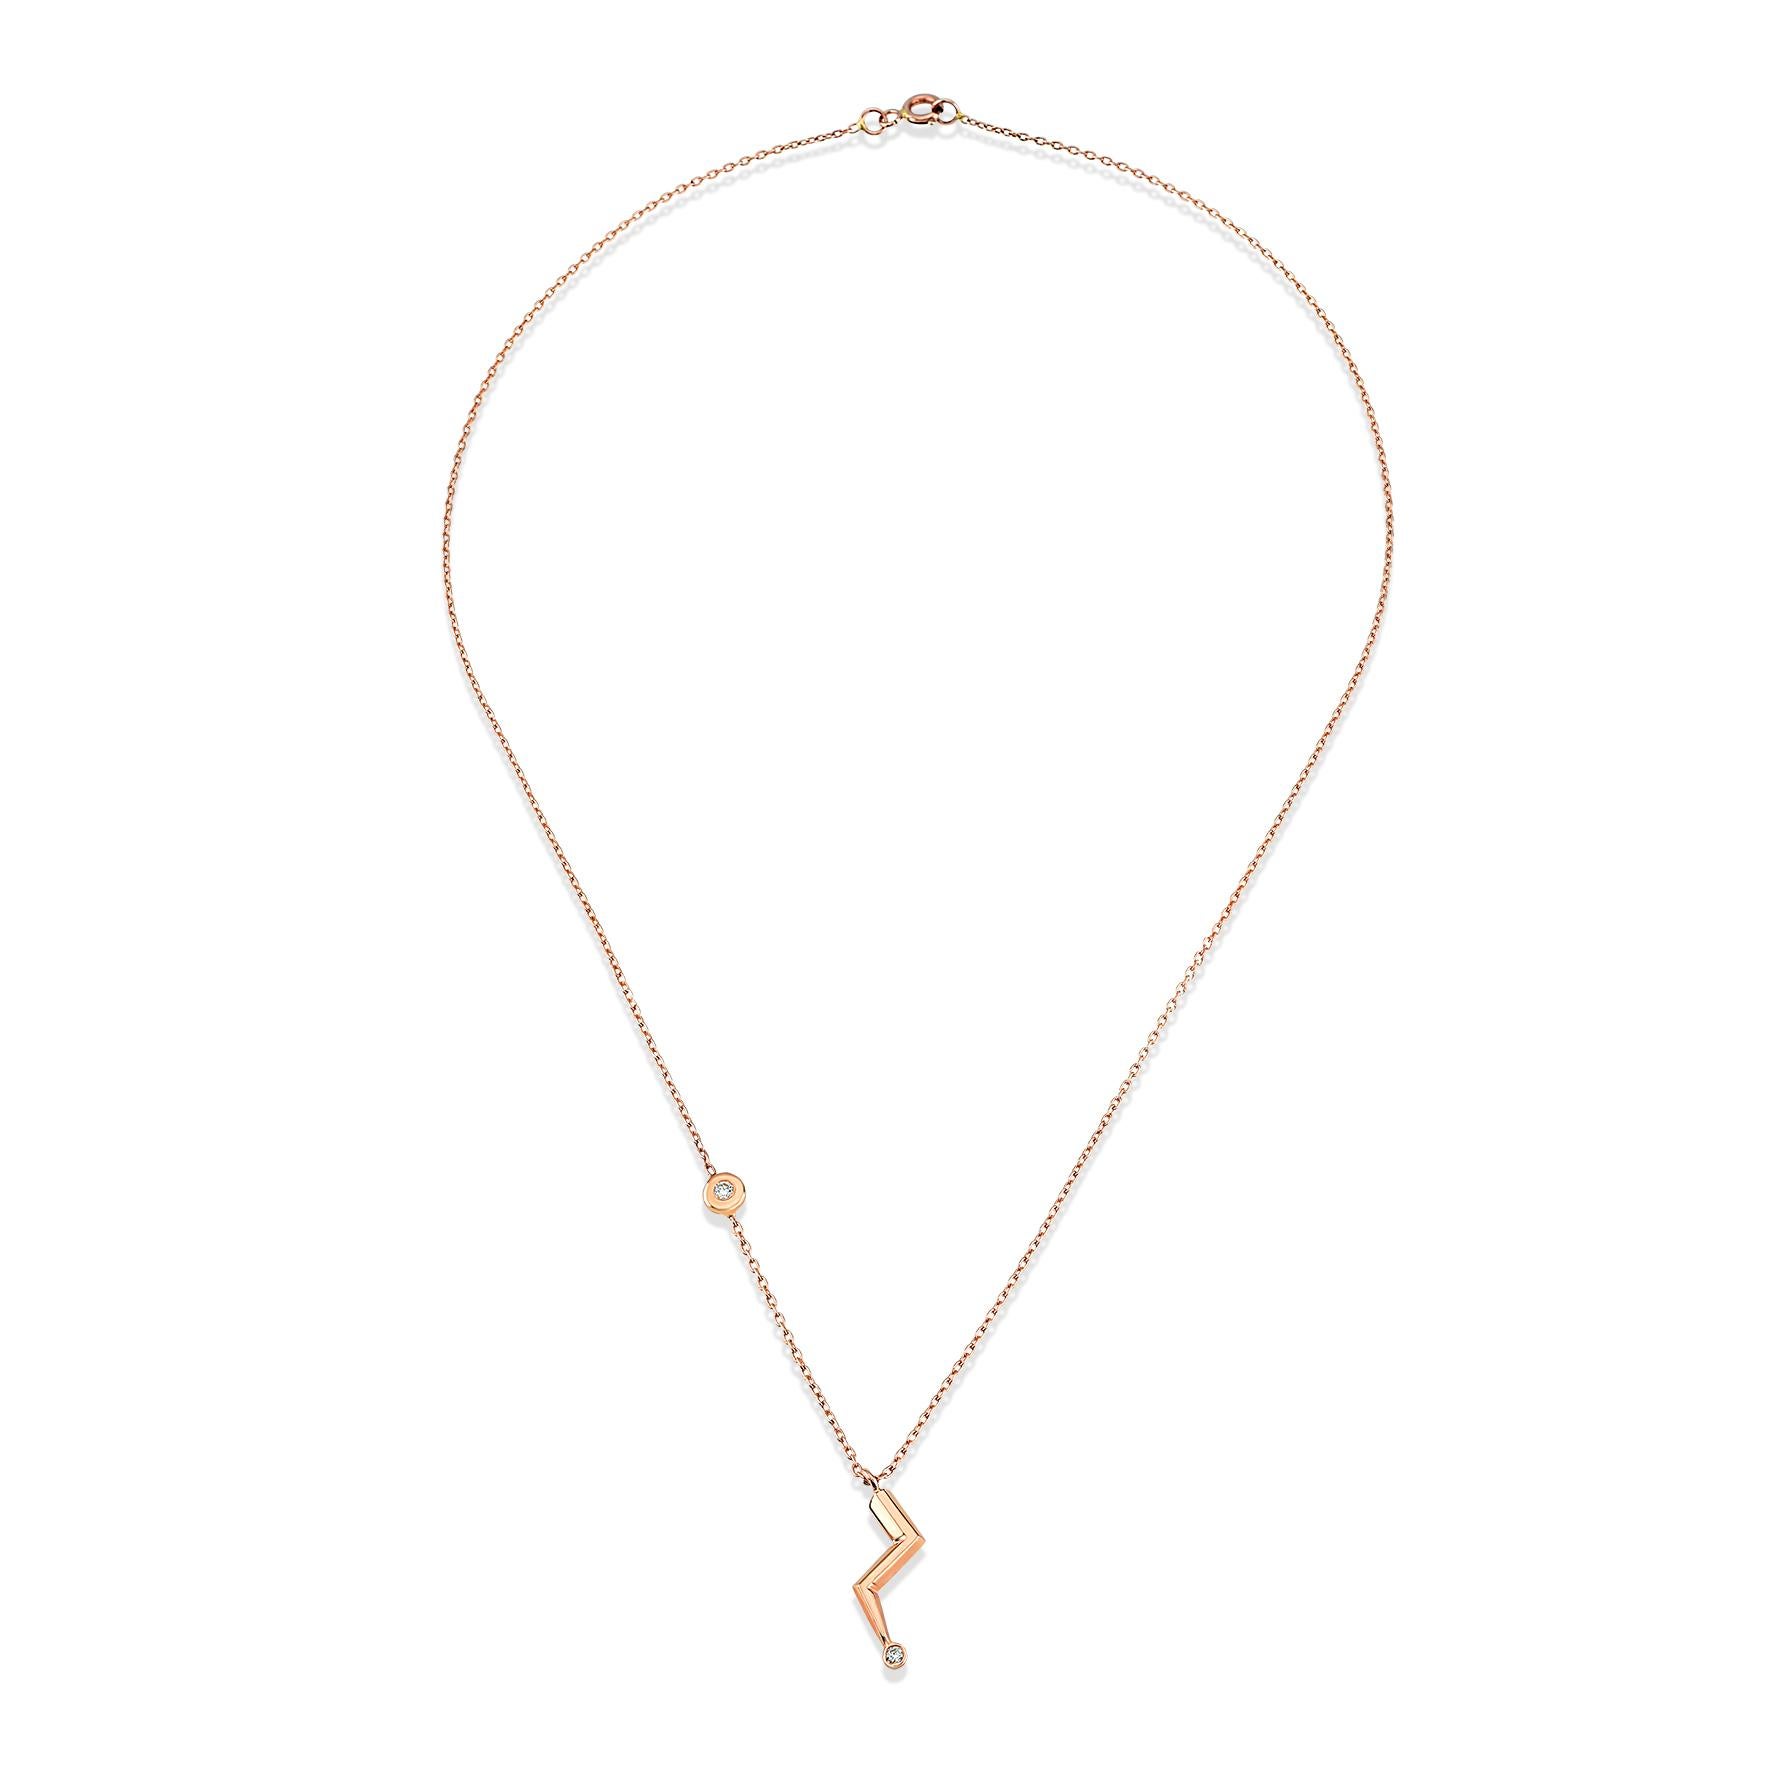 Single white diamond small lightning necklace in rose gold by Selda Jewellery

Additional Information:-
Collection: Thunder Collection
14k Rose gold
0.045ct White diamond
Lightning height: 1.5cm
Chain length: 42cm